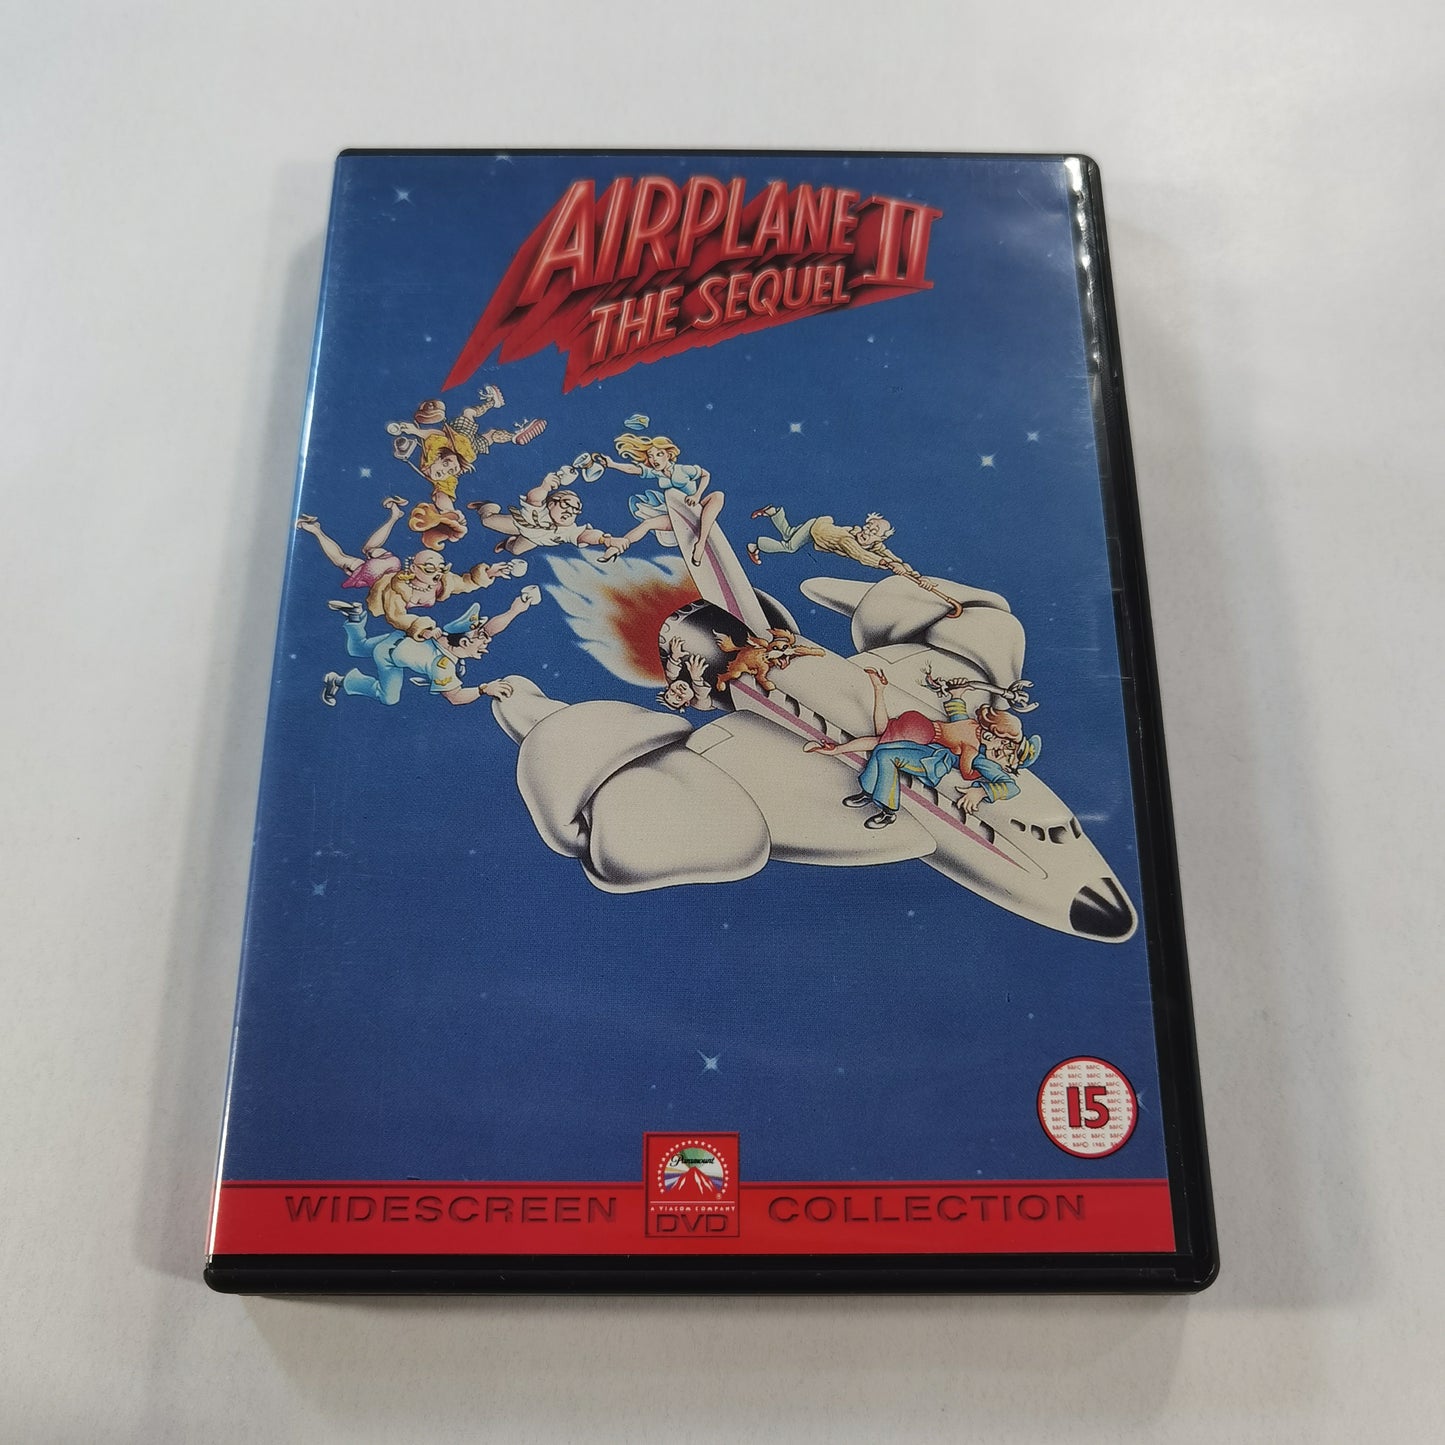 Airplane II: The Sequel (1982) - DVD UK 2001